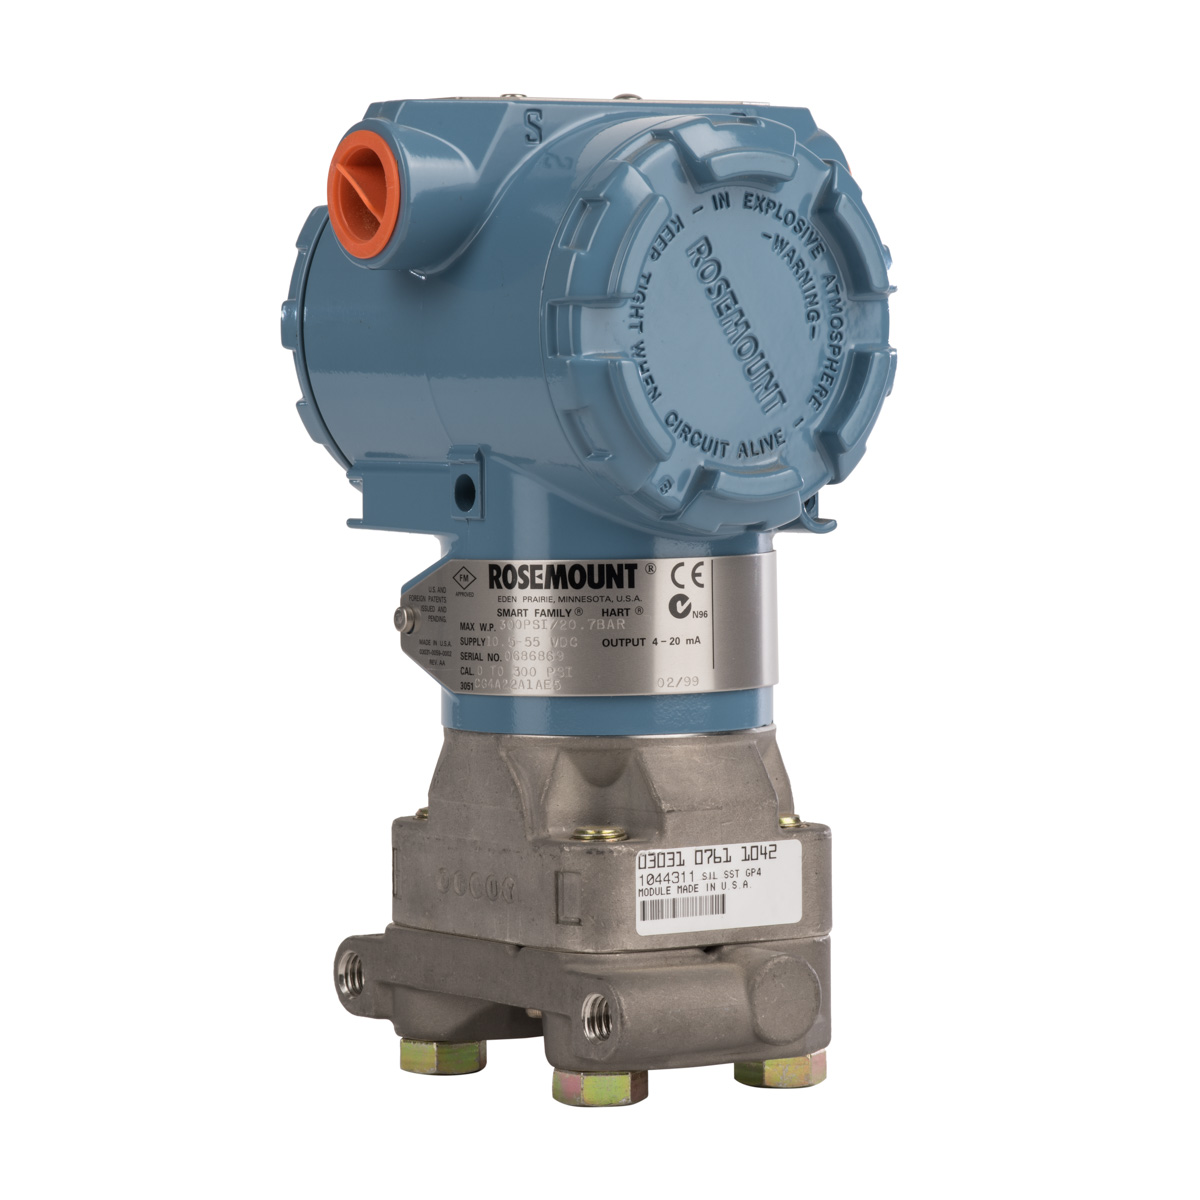 Foxboro Intelligent D/p Differential Pressure Transmitter 863dp-a2d1ss 973wh for sale online 